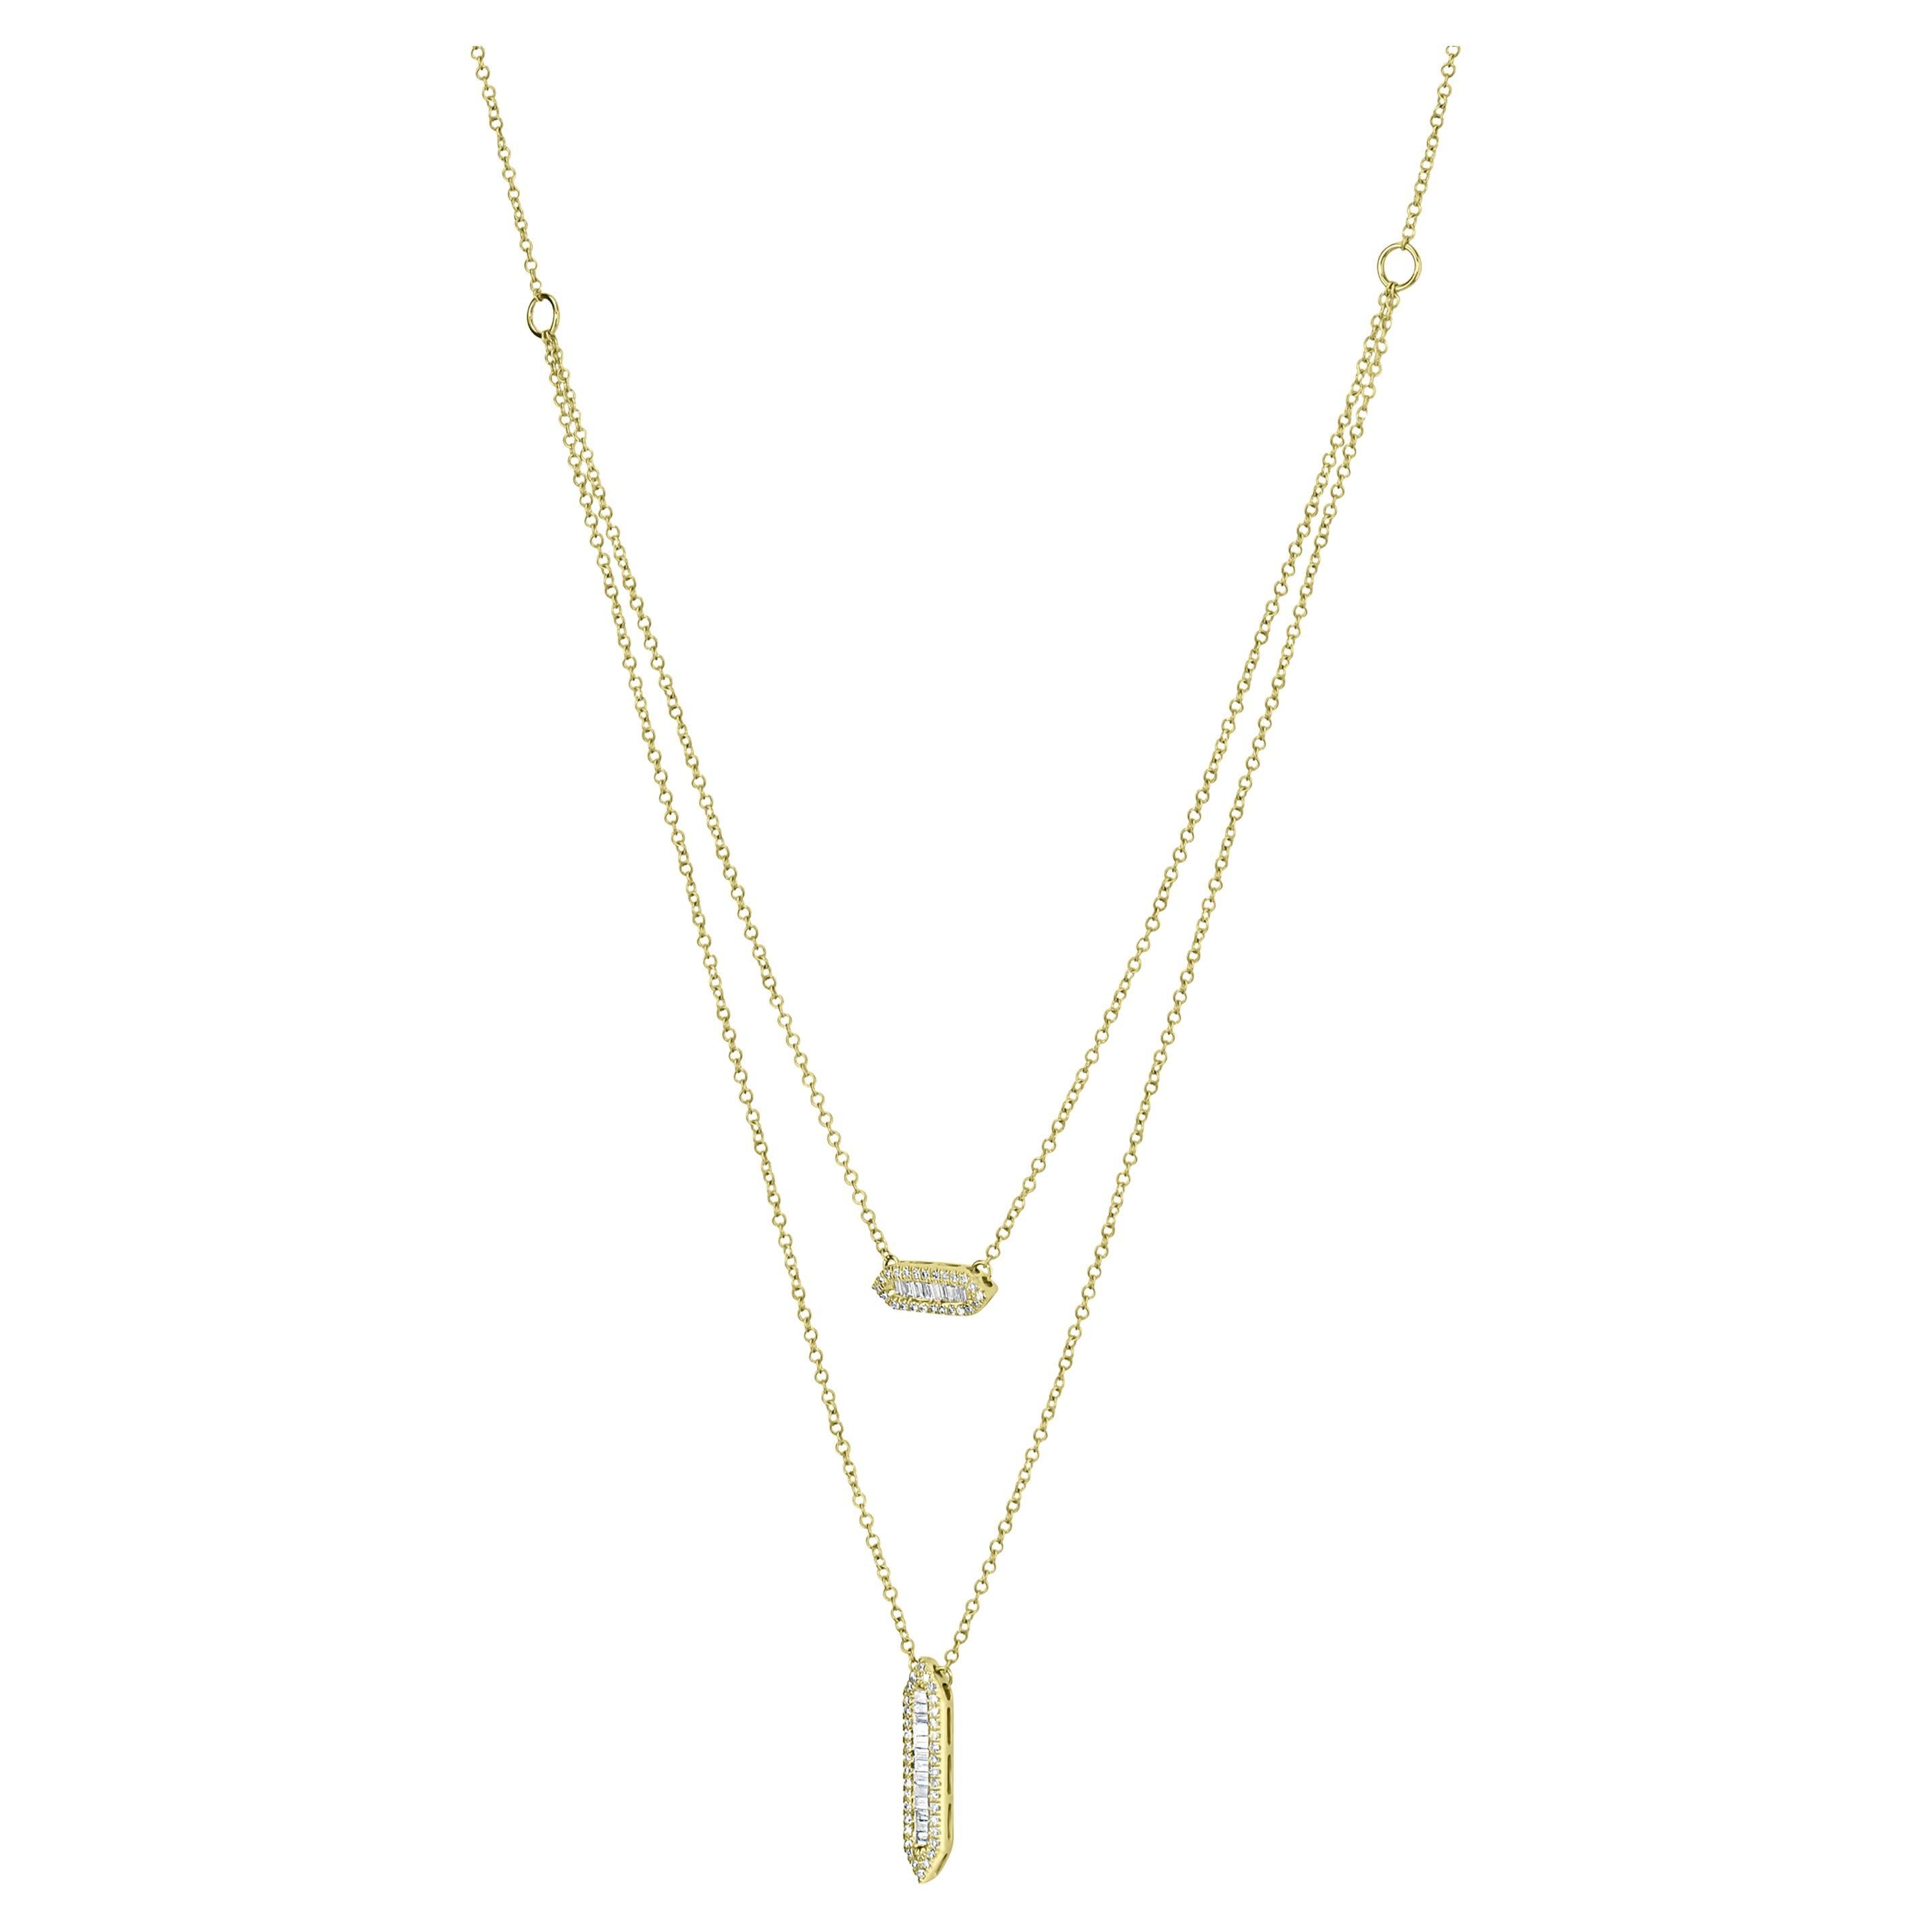 Adorn your neckline with this dreamy-looking Luxle multi-row necklace embellished with baguette diamonds flanked in round cut diamonds suspended from dual cable chains of 14K yellow gold.

Please follow the Luxury Jewels storefront to view the